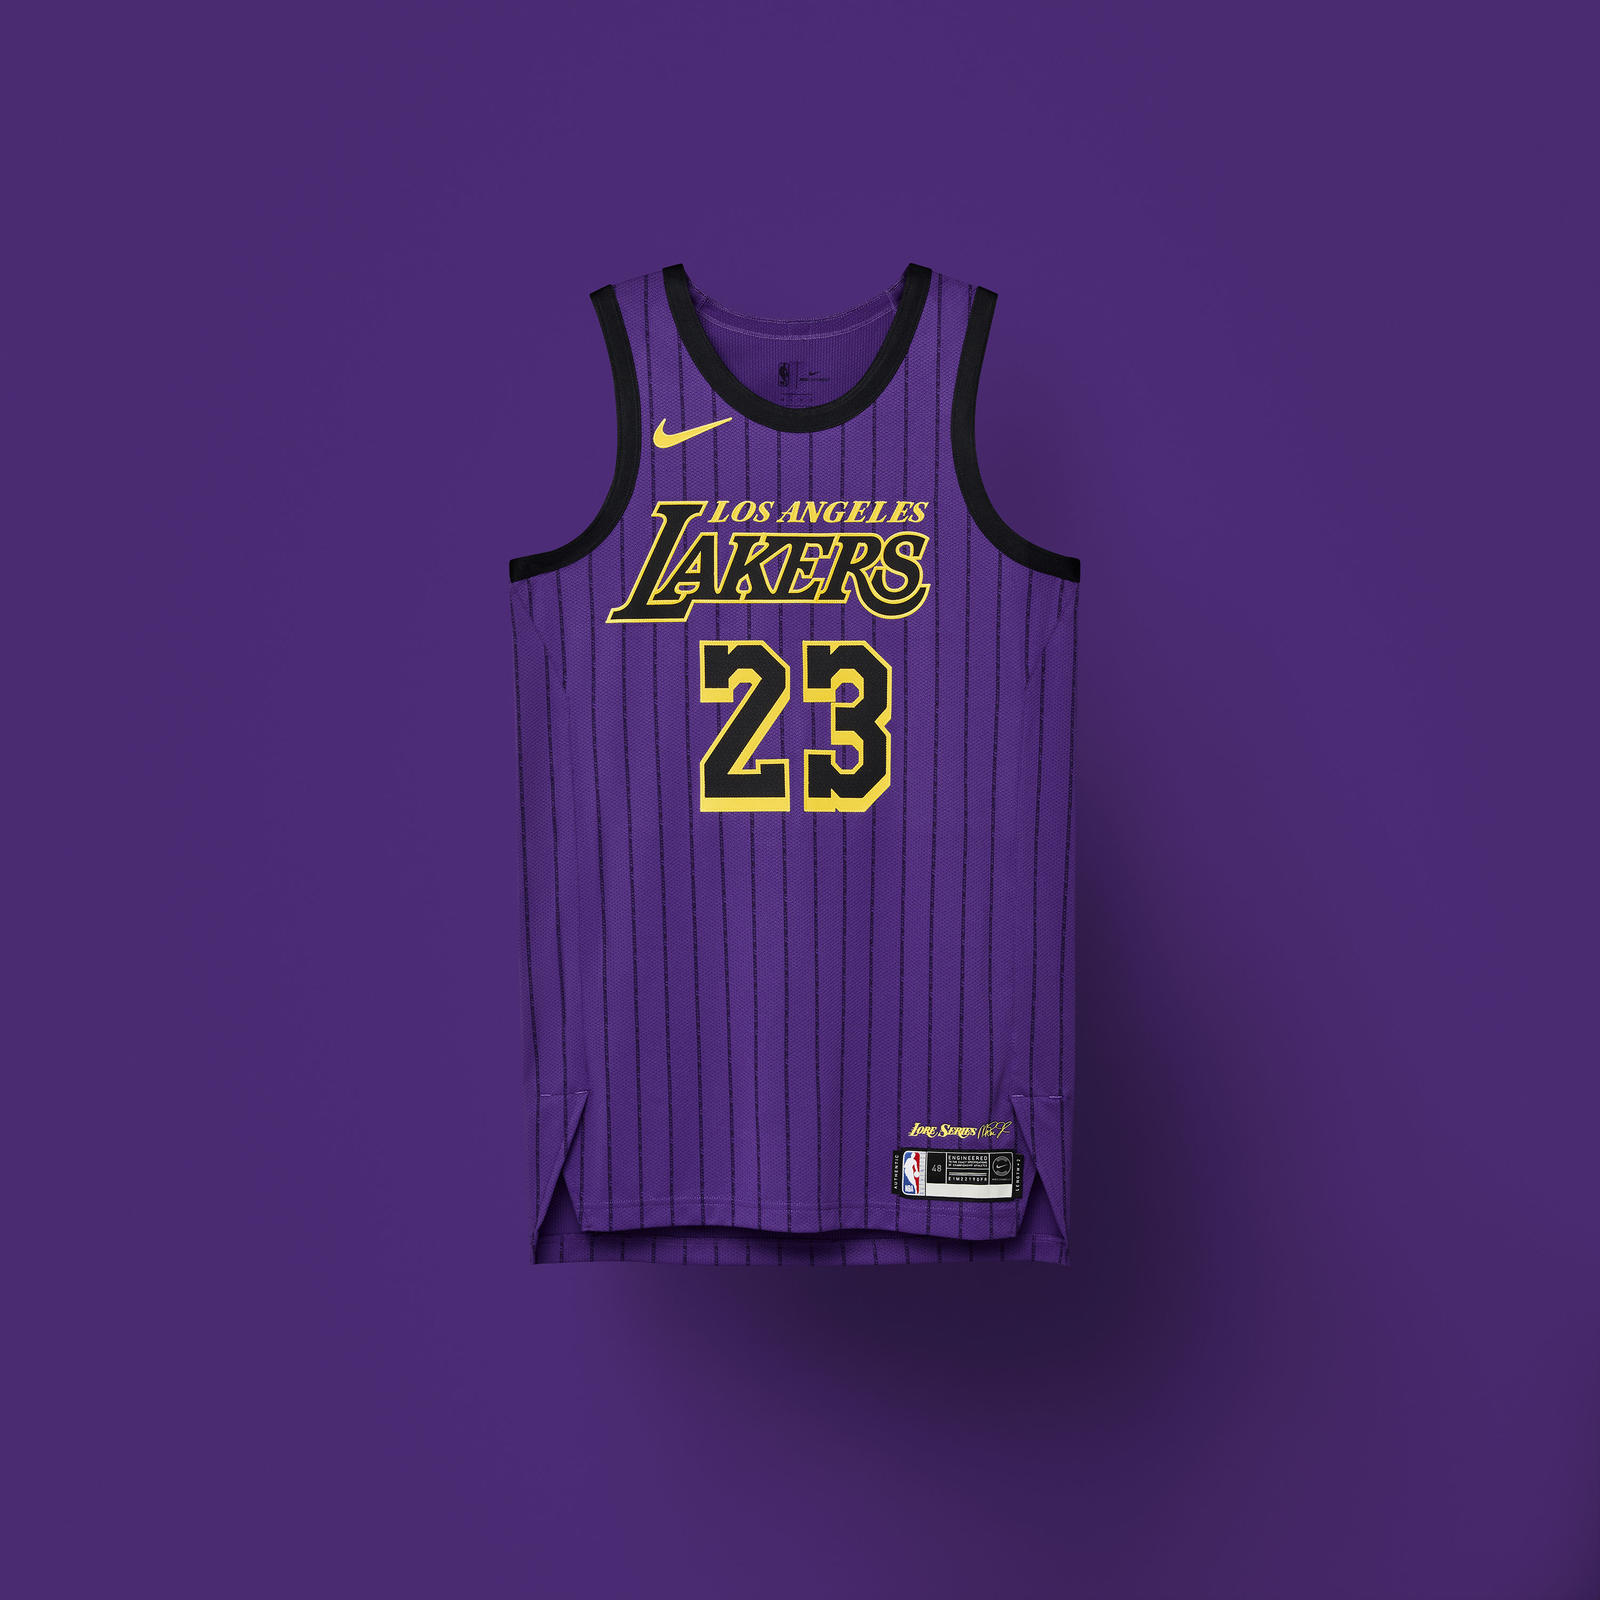 our favorite picks from the NBA's City Edition Jerseys